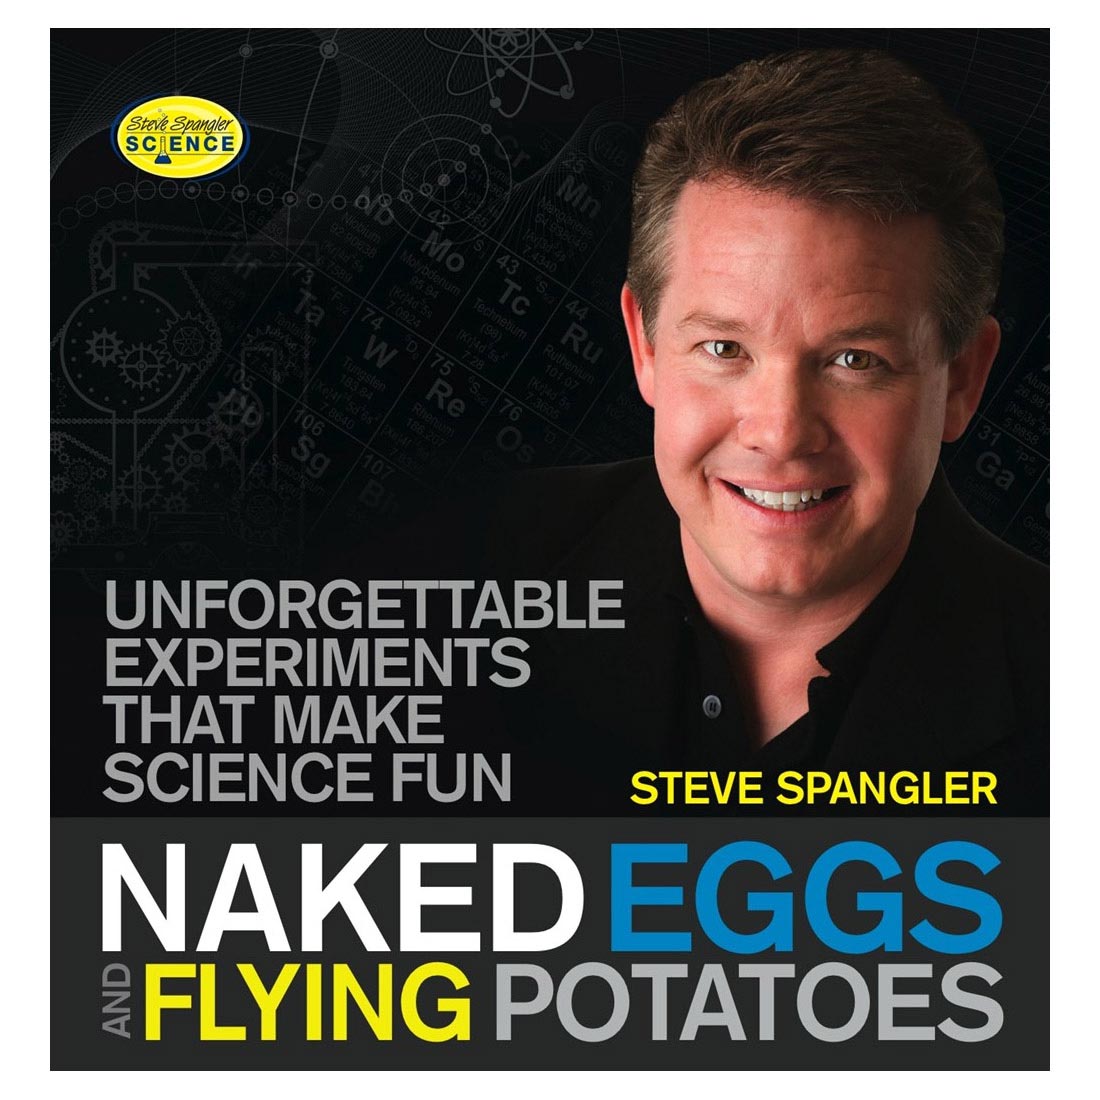 Naked Eggs And Flying Potatoes: Unforgettable Experiments That Make Science Fun Book